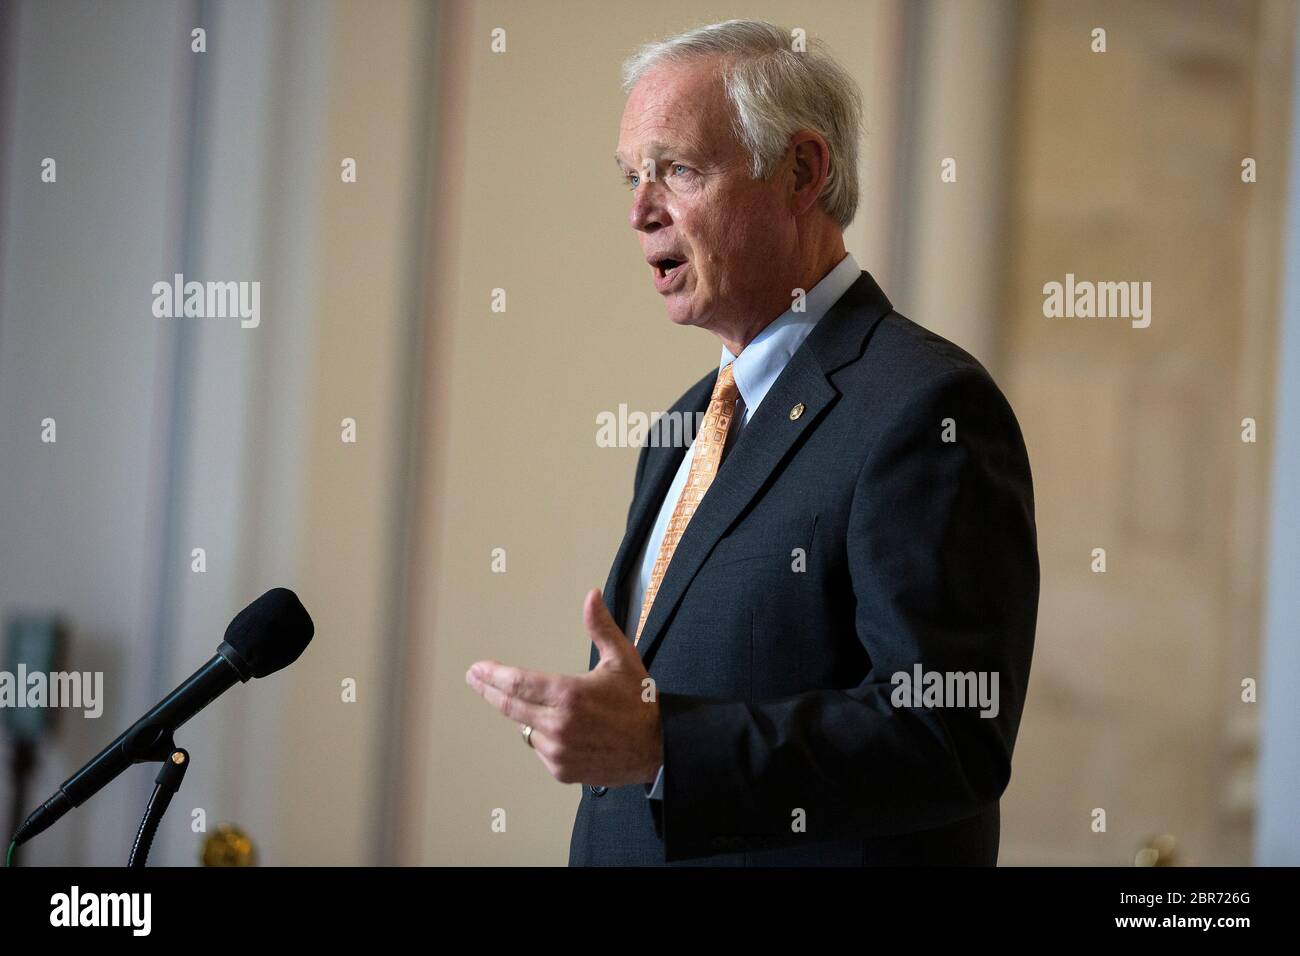 United States Senator Ron Johnson (Republican of Wisconsin) speaks to members of the media prior to a U.S. Senate Committee on Homeland Security and Governmental Affairs meeting in the Senate Russell Office Building in Washington, DC, U.S., on Wednesday, May 20, 2020, as the committee considers a motion to issue a subpoena to Blue Star Strategies. Credit: Stefani Reynolds/CNP /MediaPunch Stock Photo